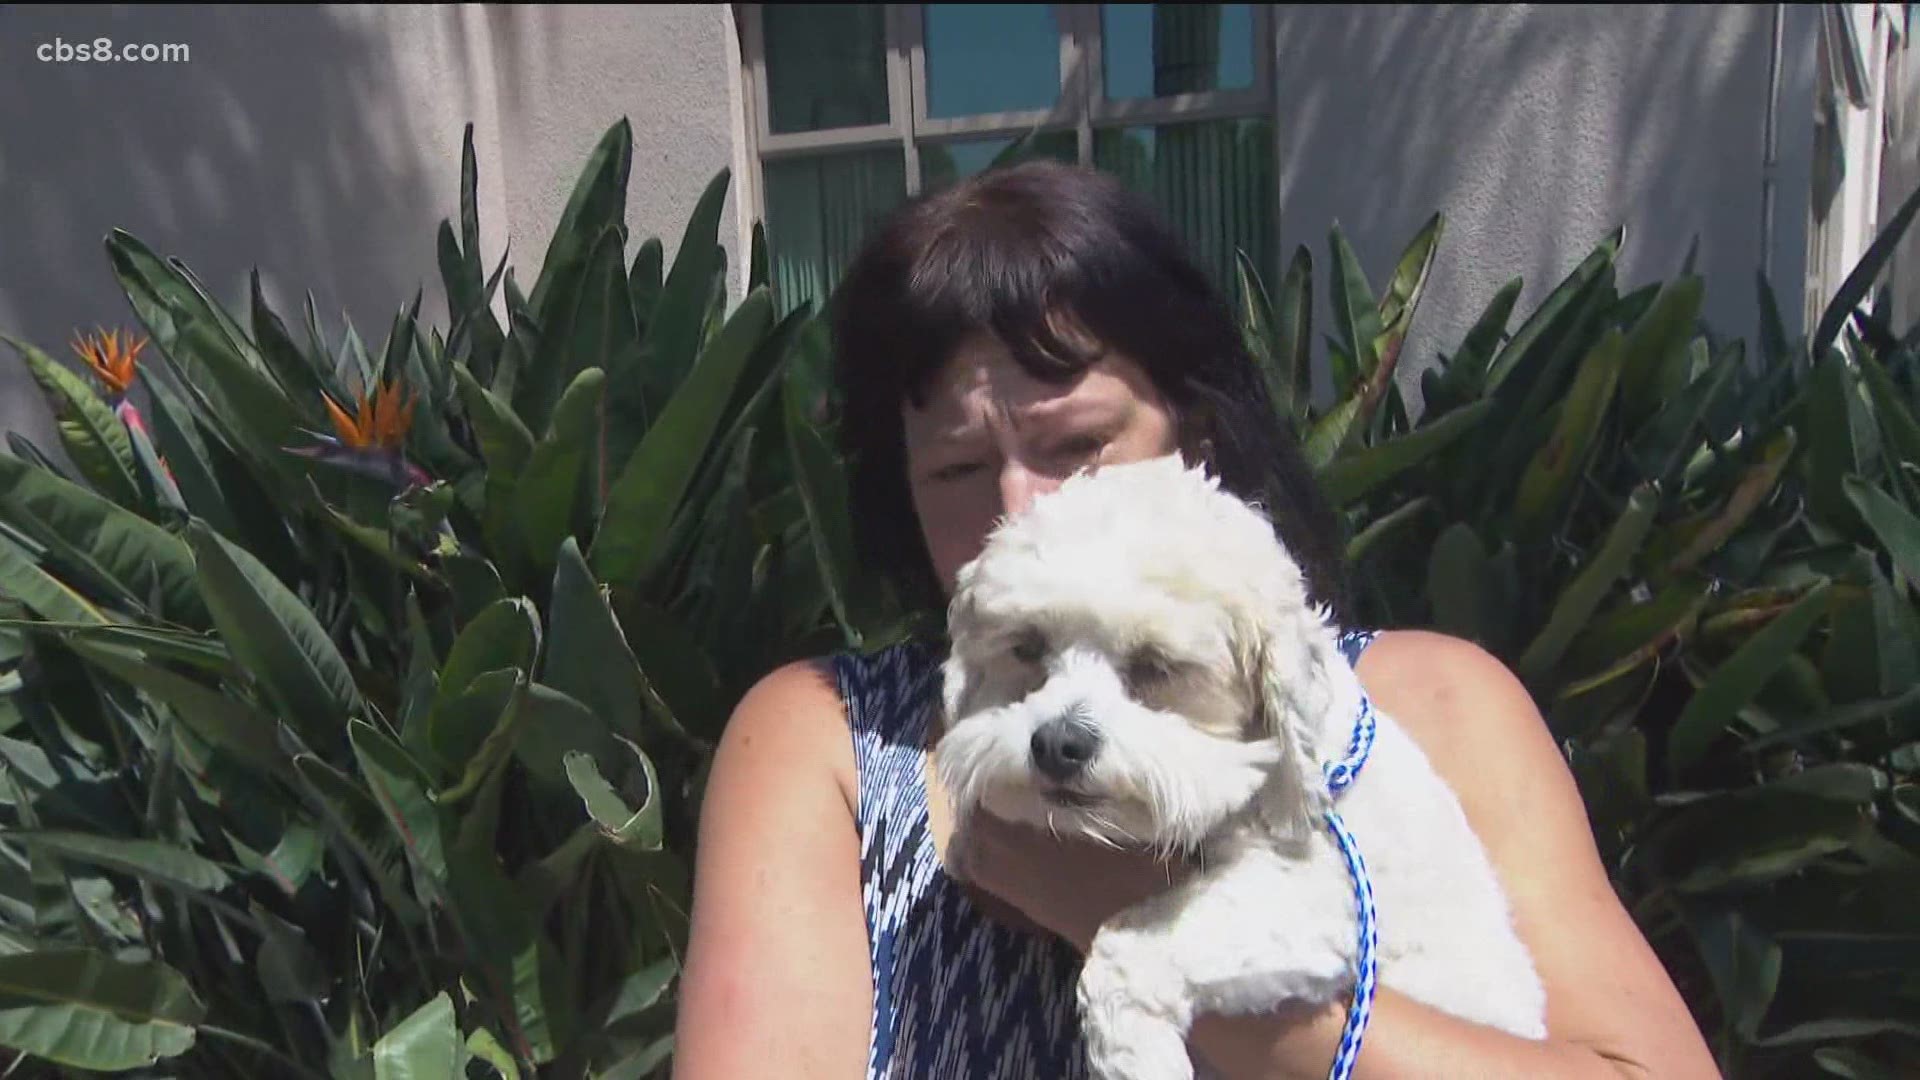 The San Diego Humane Society does their best to reunite pets with their owners.